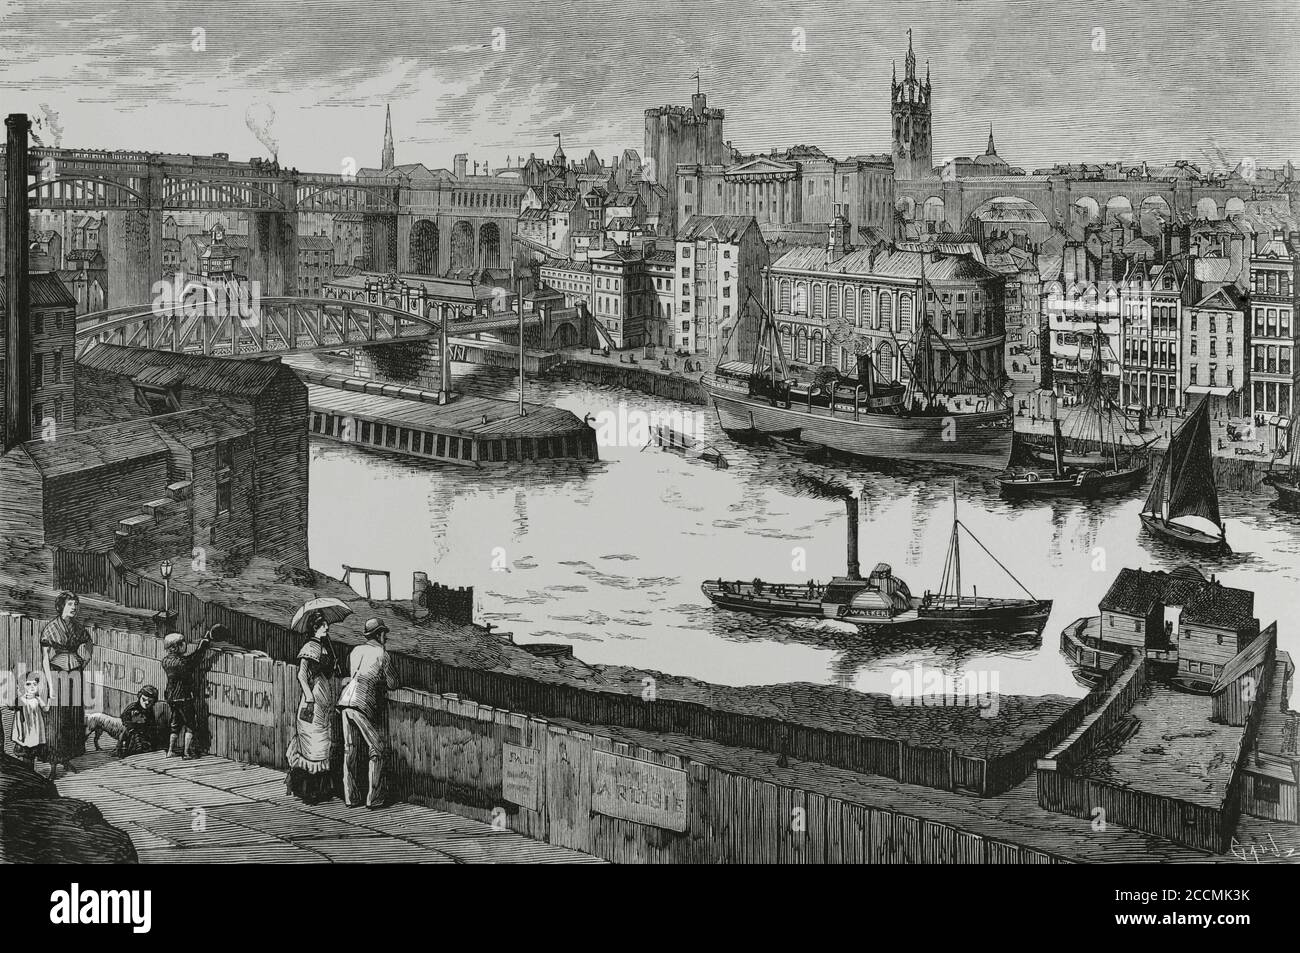 United Kingdom, England, Newcastle. View of the city on the banks of the river Tyne. Important commercial and manufacturing center. Engraving by Tomas Carlos Capuz (1834-1899). La Ilustracion Española y Americana, 1881. Stock Photo